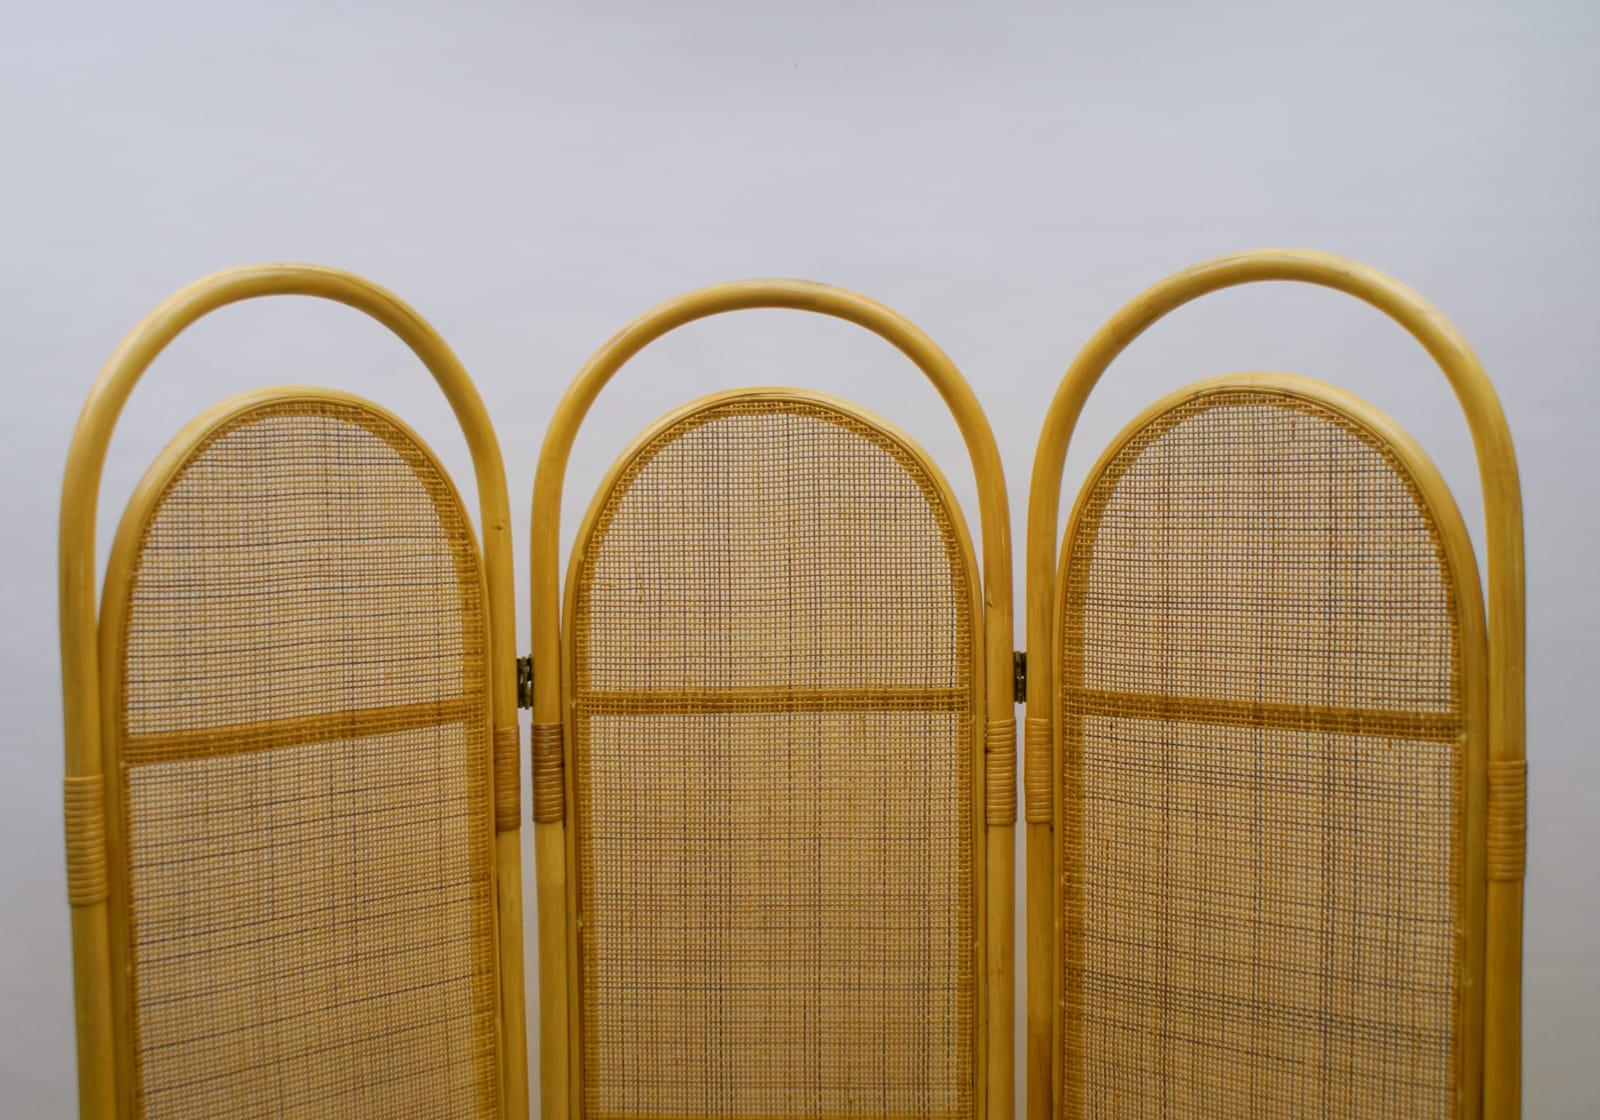 Mid-Century Modern Sculptural Three-Panel Folding Screen Room Divider in Rattan and Wicker, 1960s For Sale